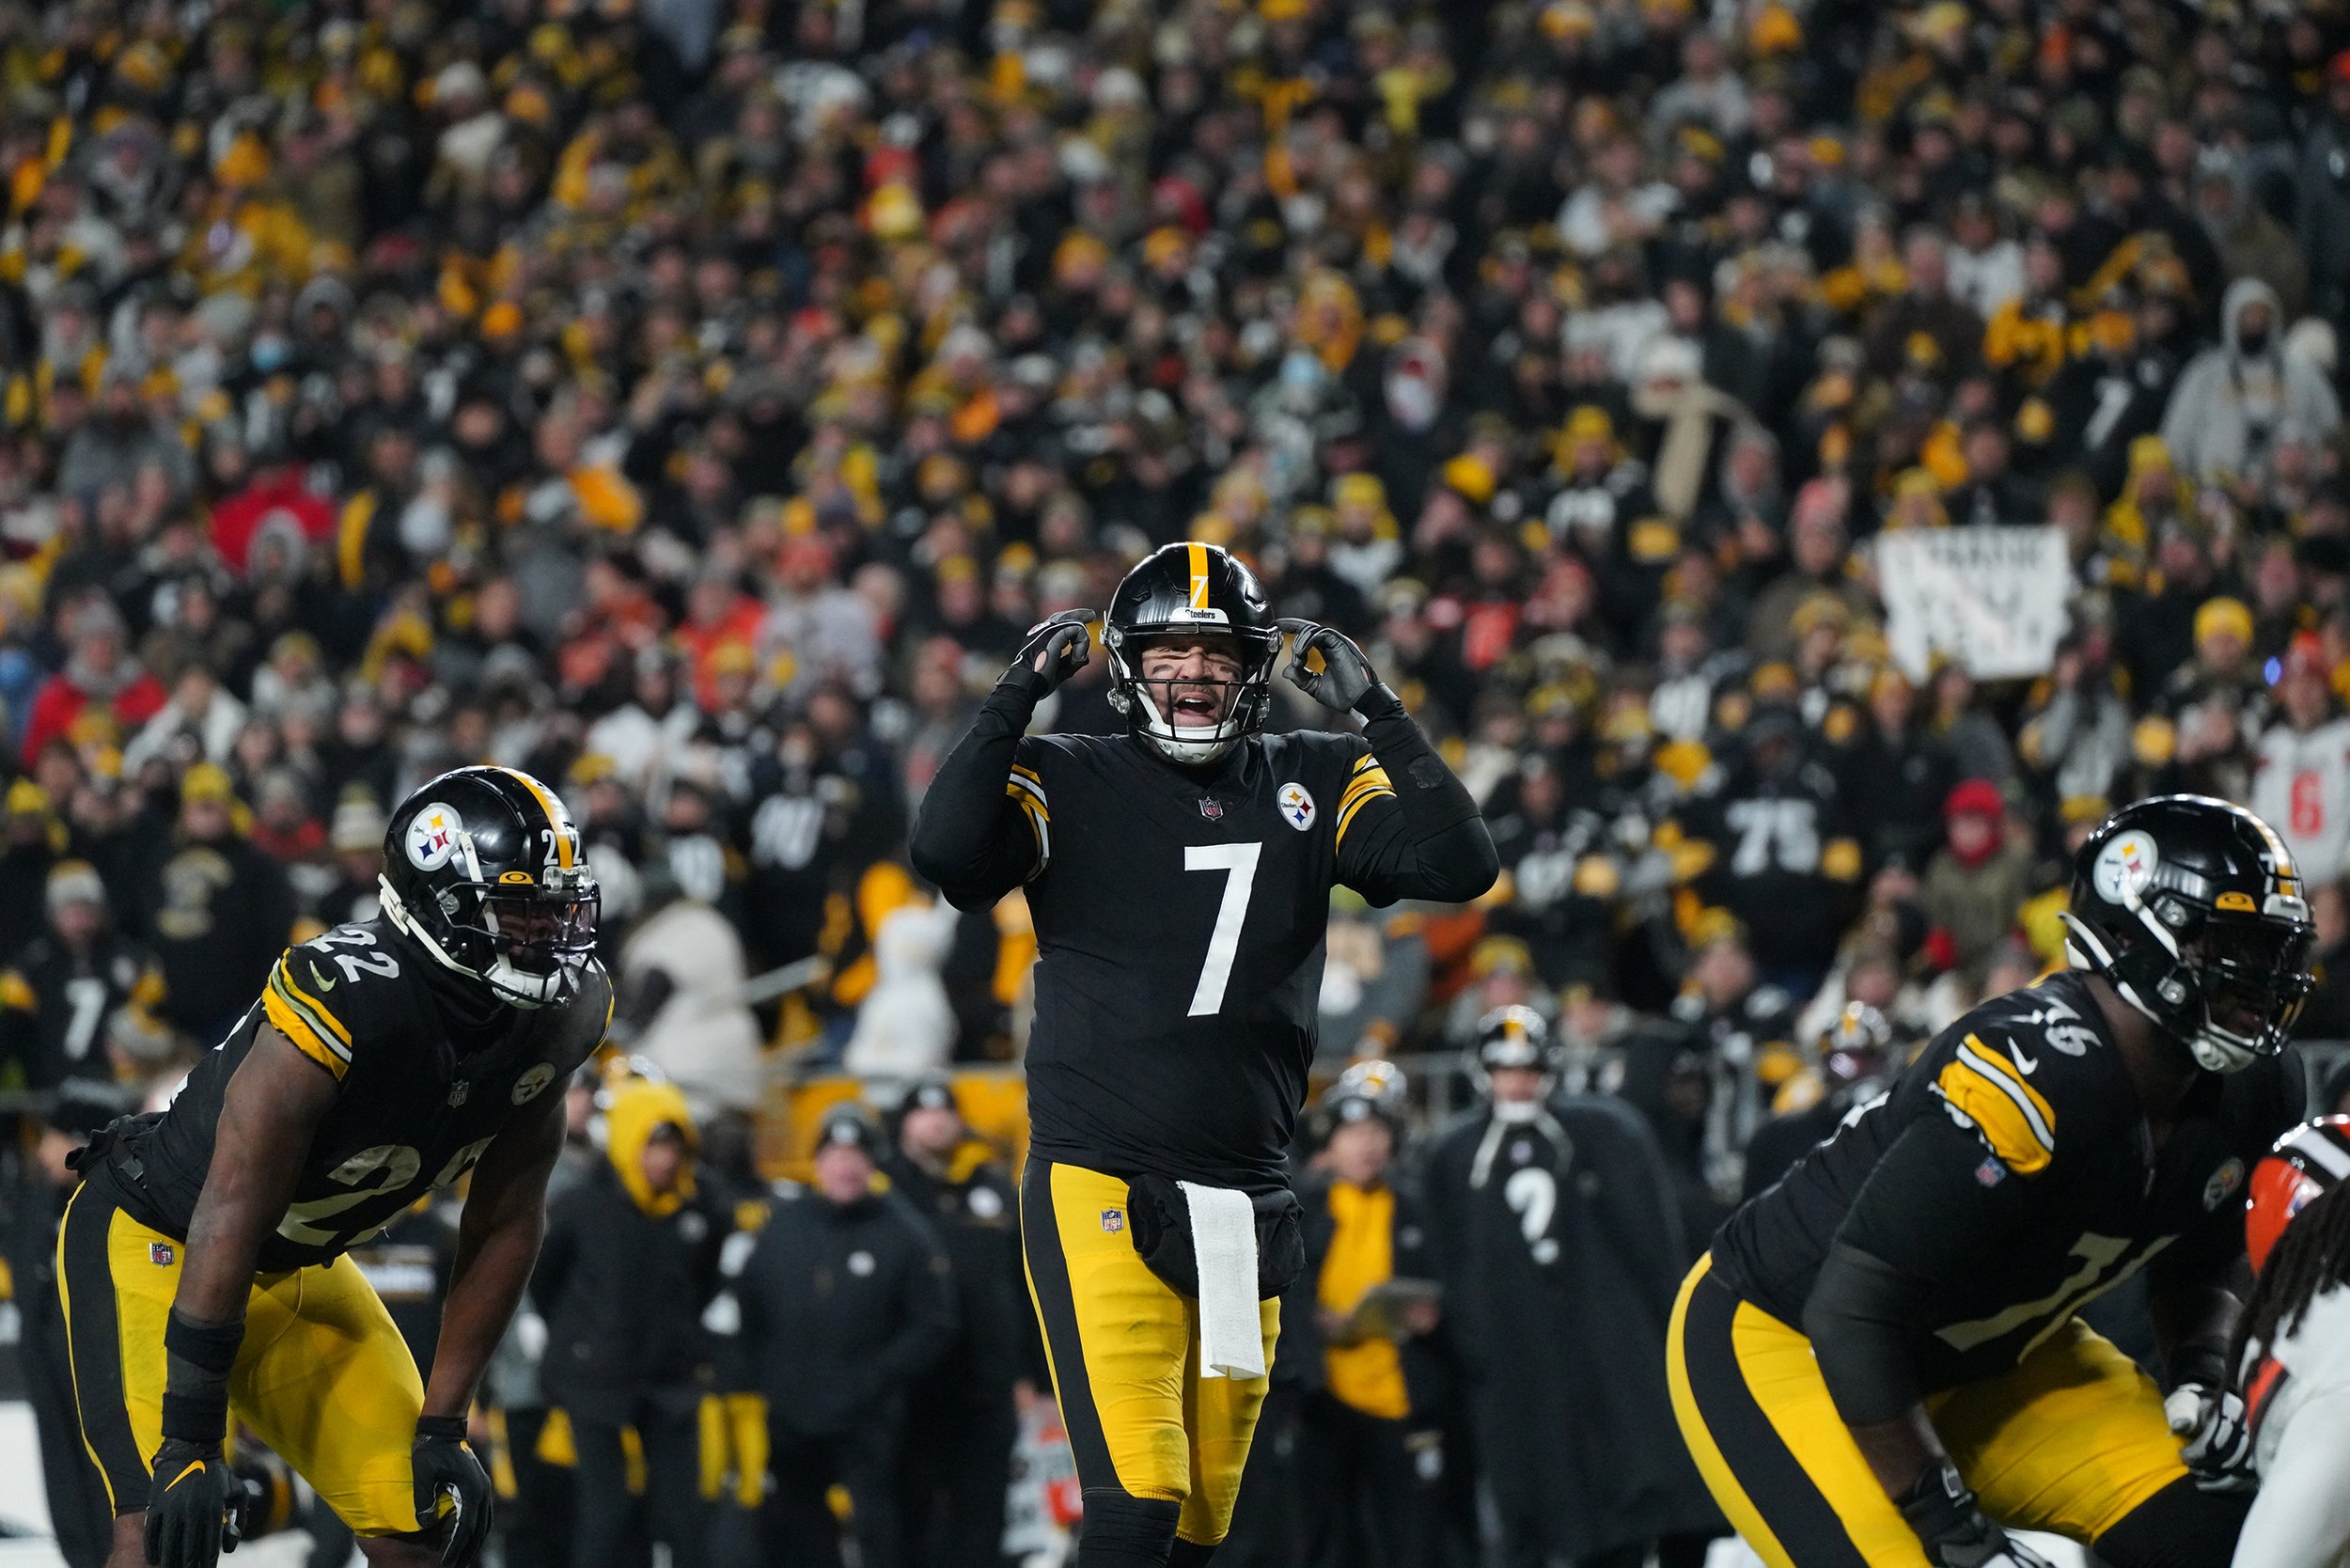  Steelers quarterback Ben Roethlisberger talks to his team before a play against the Browns on Monday, Jan. 3, 2022, at Heinz Field on the North Shore. (Emily Matthews/Post-Gazette) 